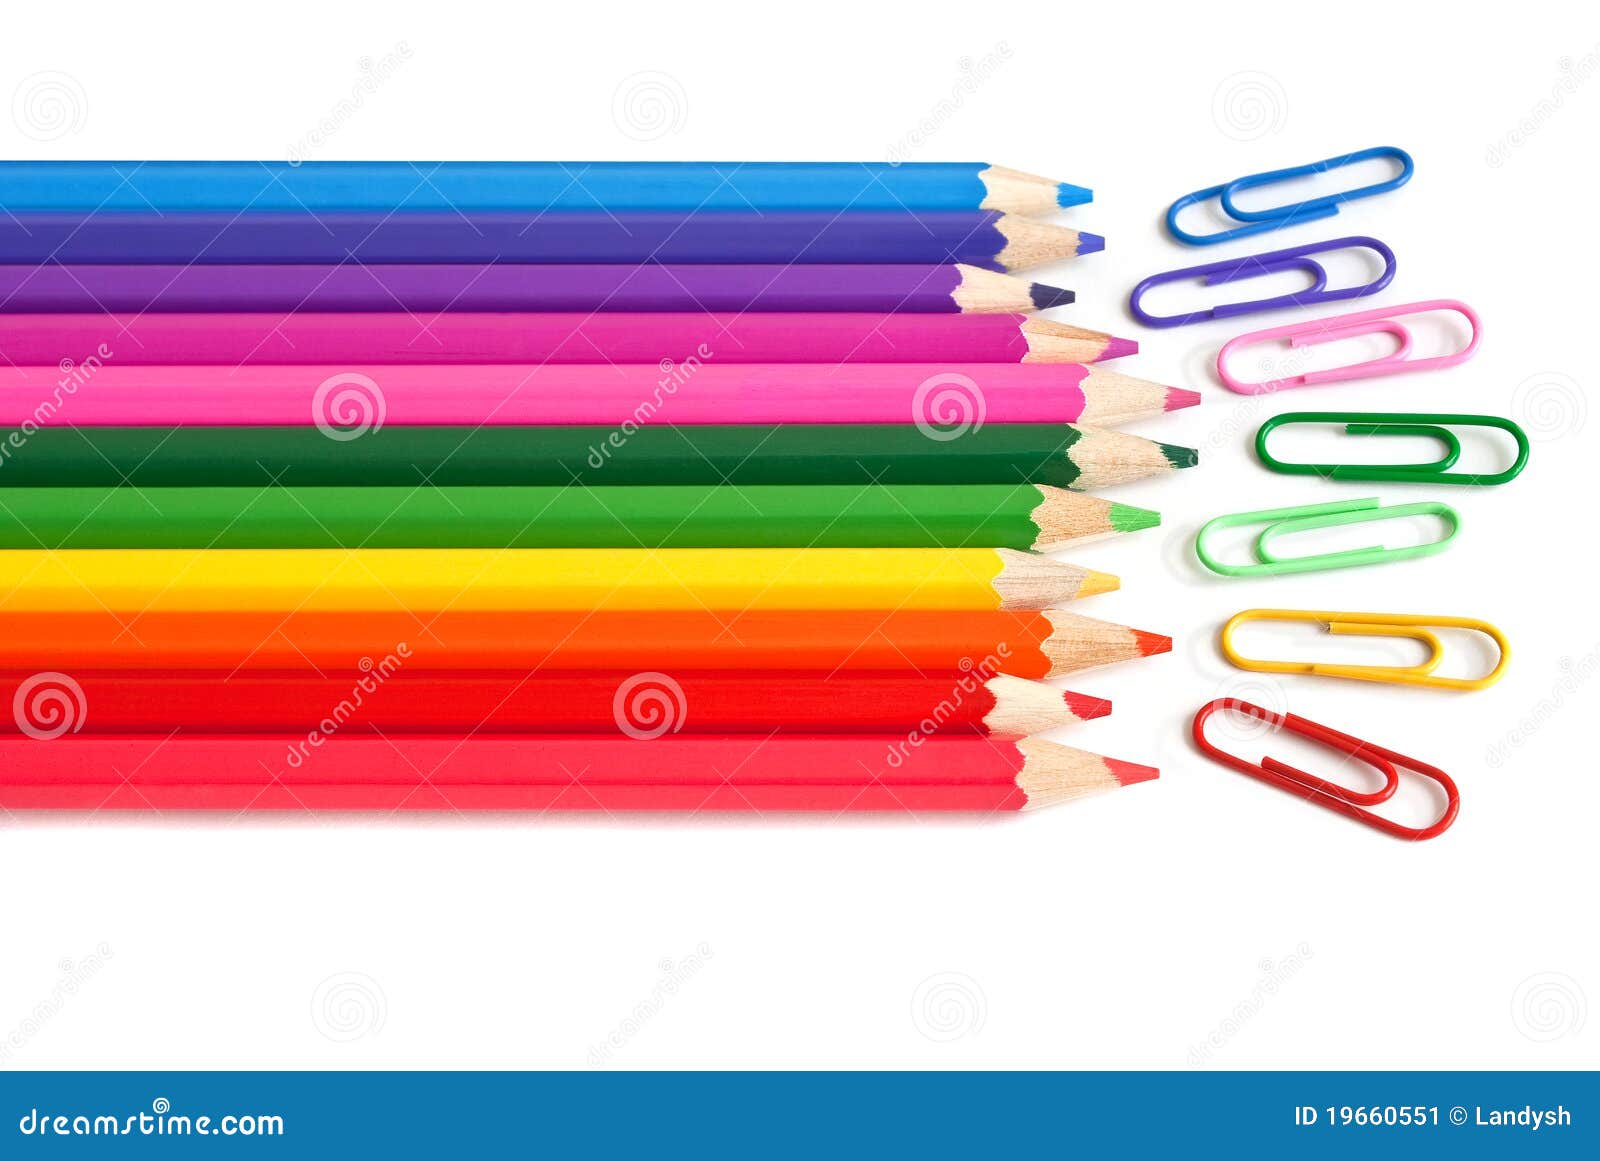 colored crayons and paper clips, office stationery